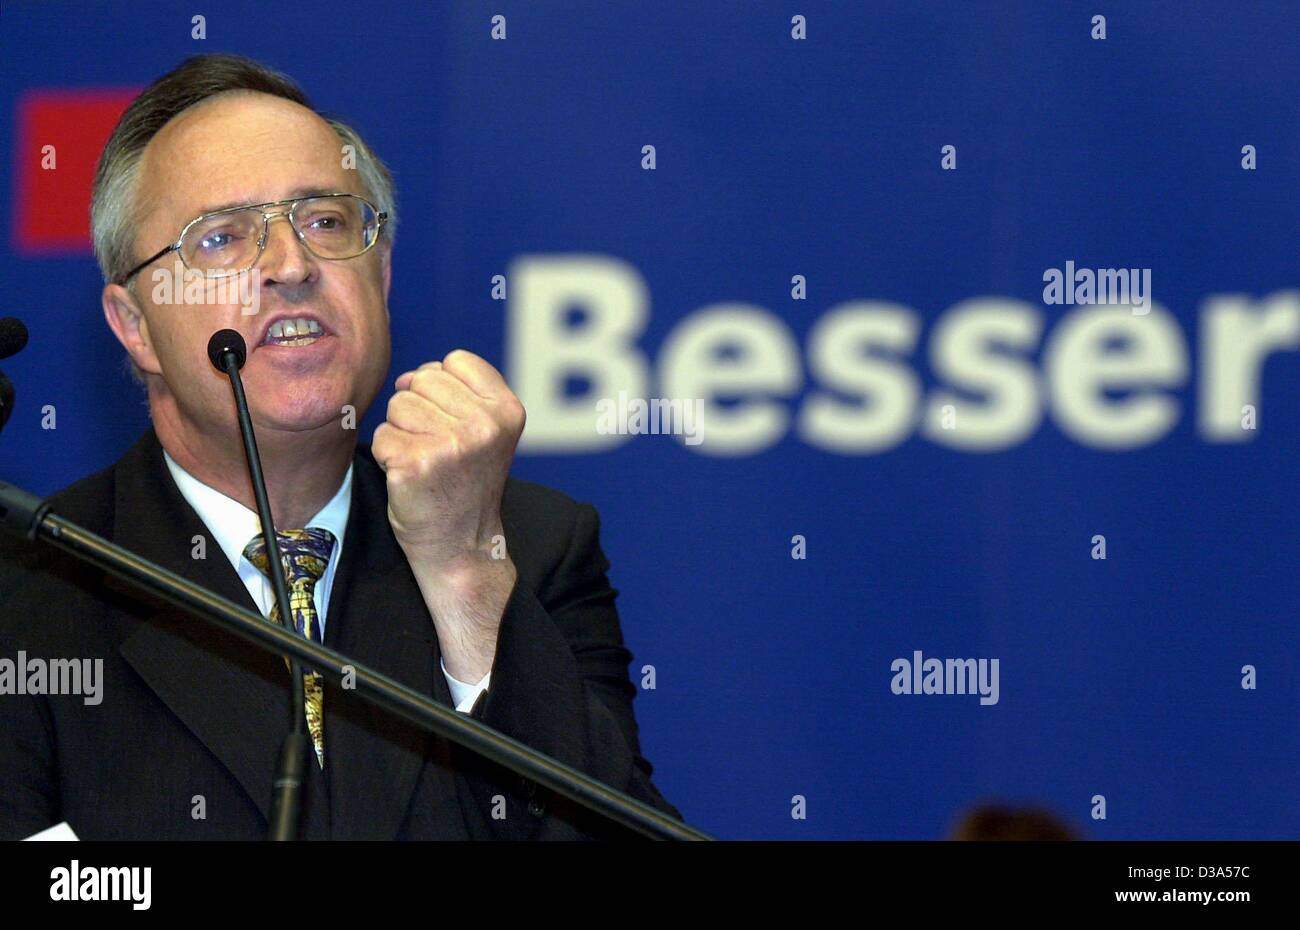 (dpa) - The German Finance Minister Hans Eichel (SPD) speaks energetically in front of a slogan that reads 'besser' (better)  at a convention of the Social Democratic Party in Rotenburg, Germany, 27 April 2002. Stock Photo